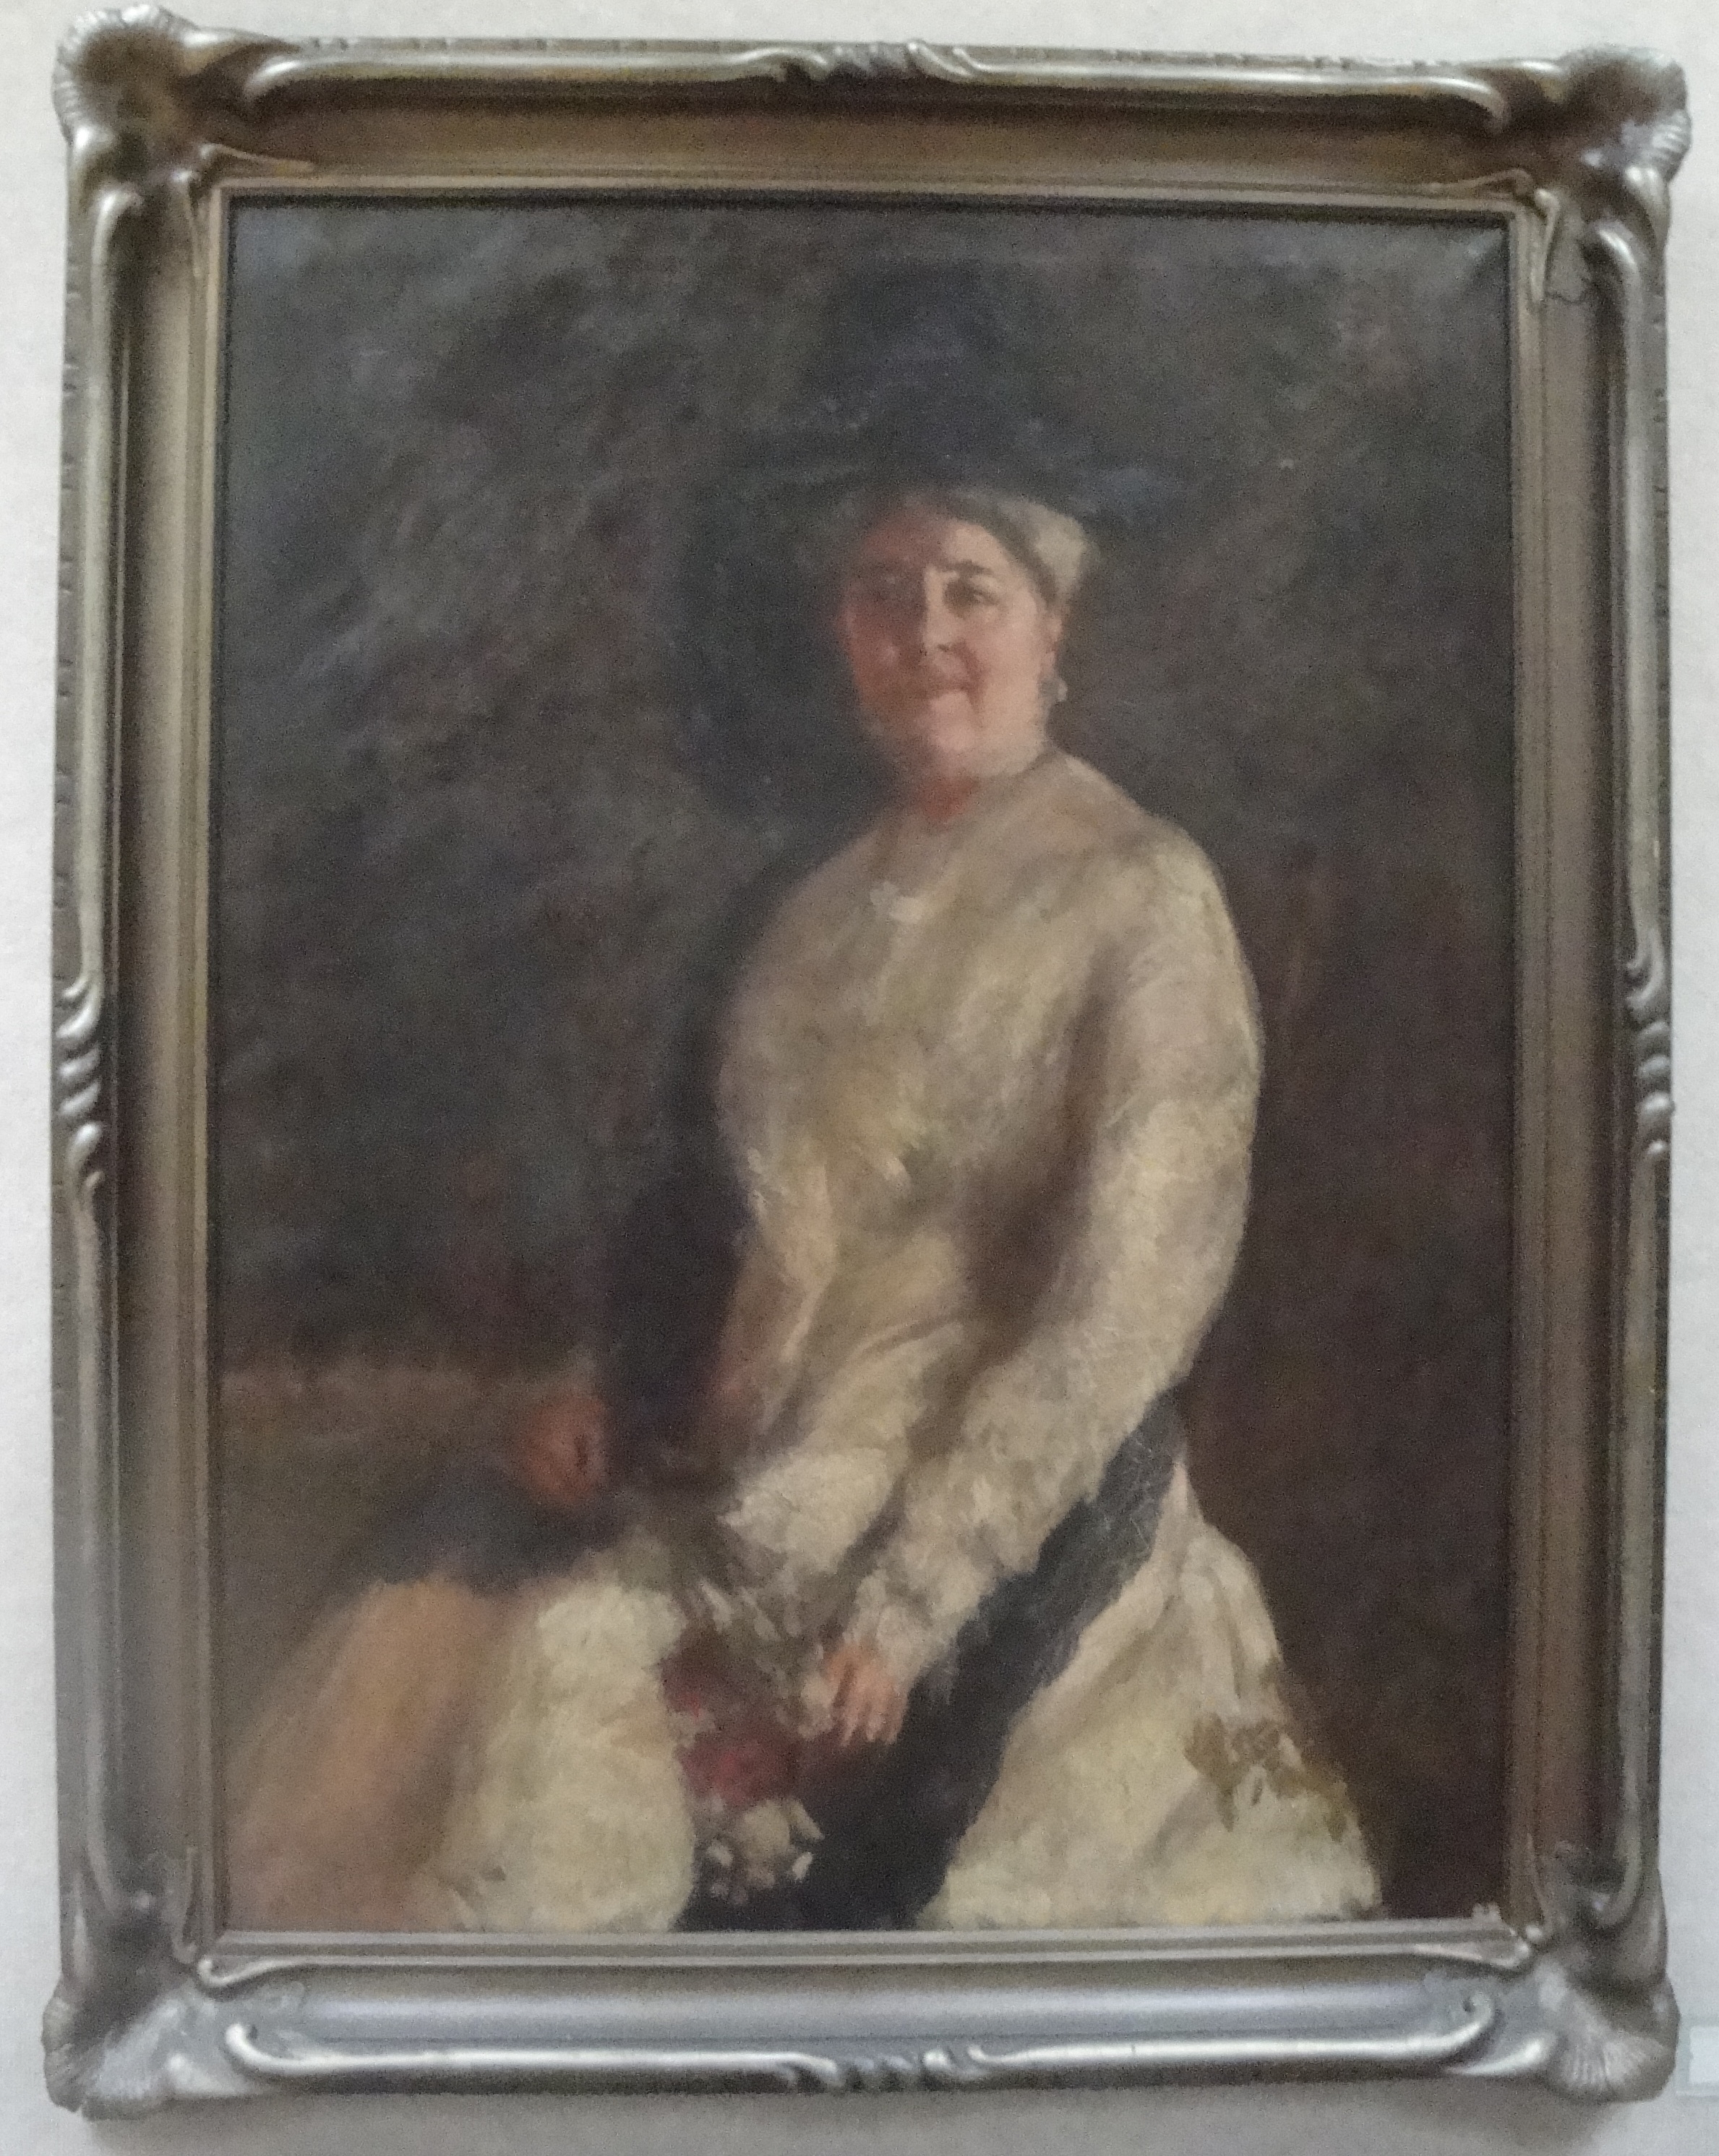 Portrait of Margaret Byers by William Edwards Cook 1881-1959 (Copy)